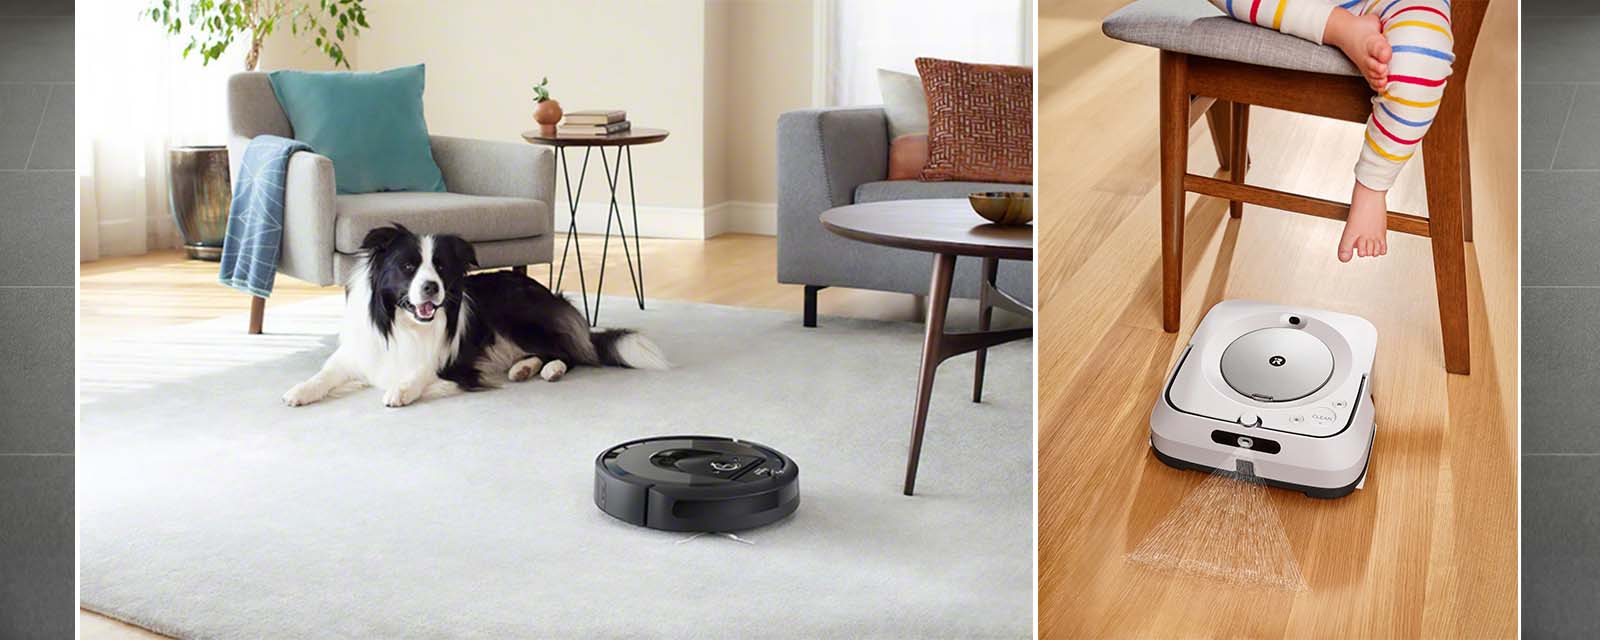 The iRobot Roomba i7+ Robotic Vacuum cleaning the carpet and the iRobot Braava jet m6 mopping floorboards.